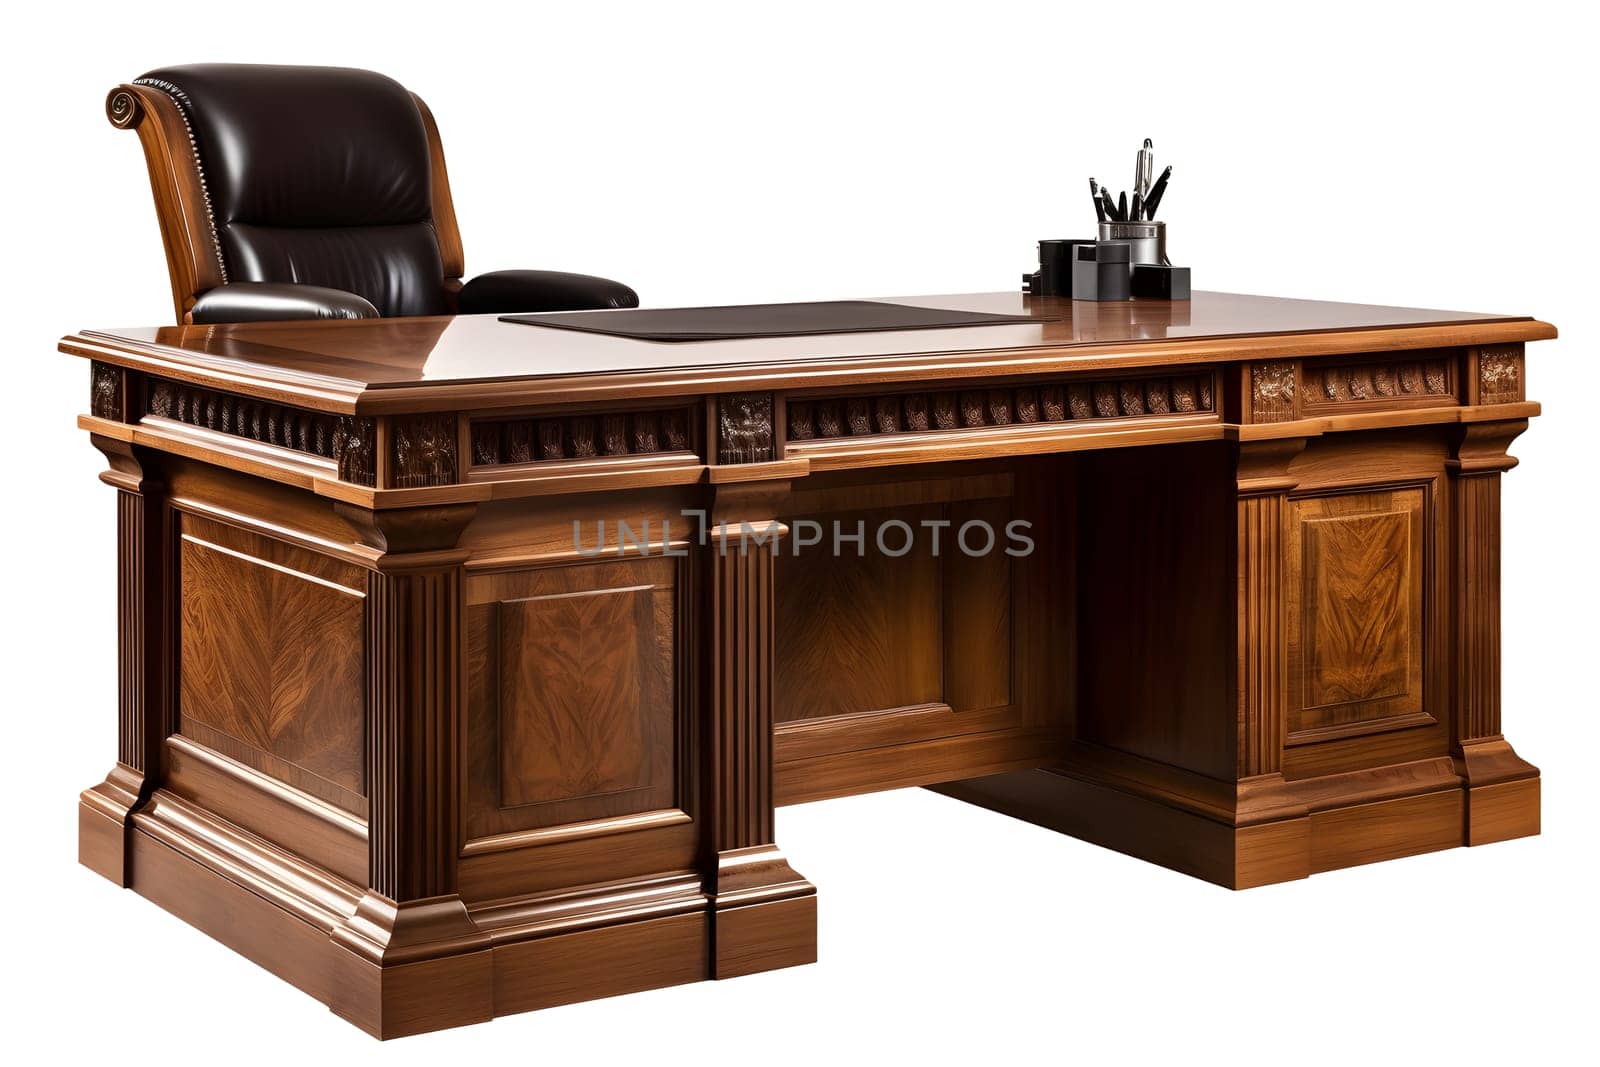 Heavy wooden executive desk with armchair isolated on white background. Neural network generated in May 2023. Not based on any actual person, scene or pattern.